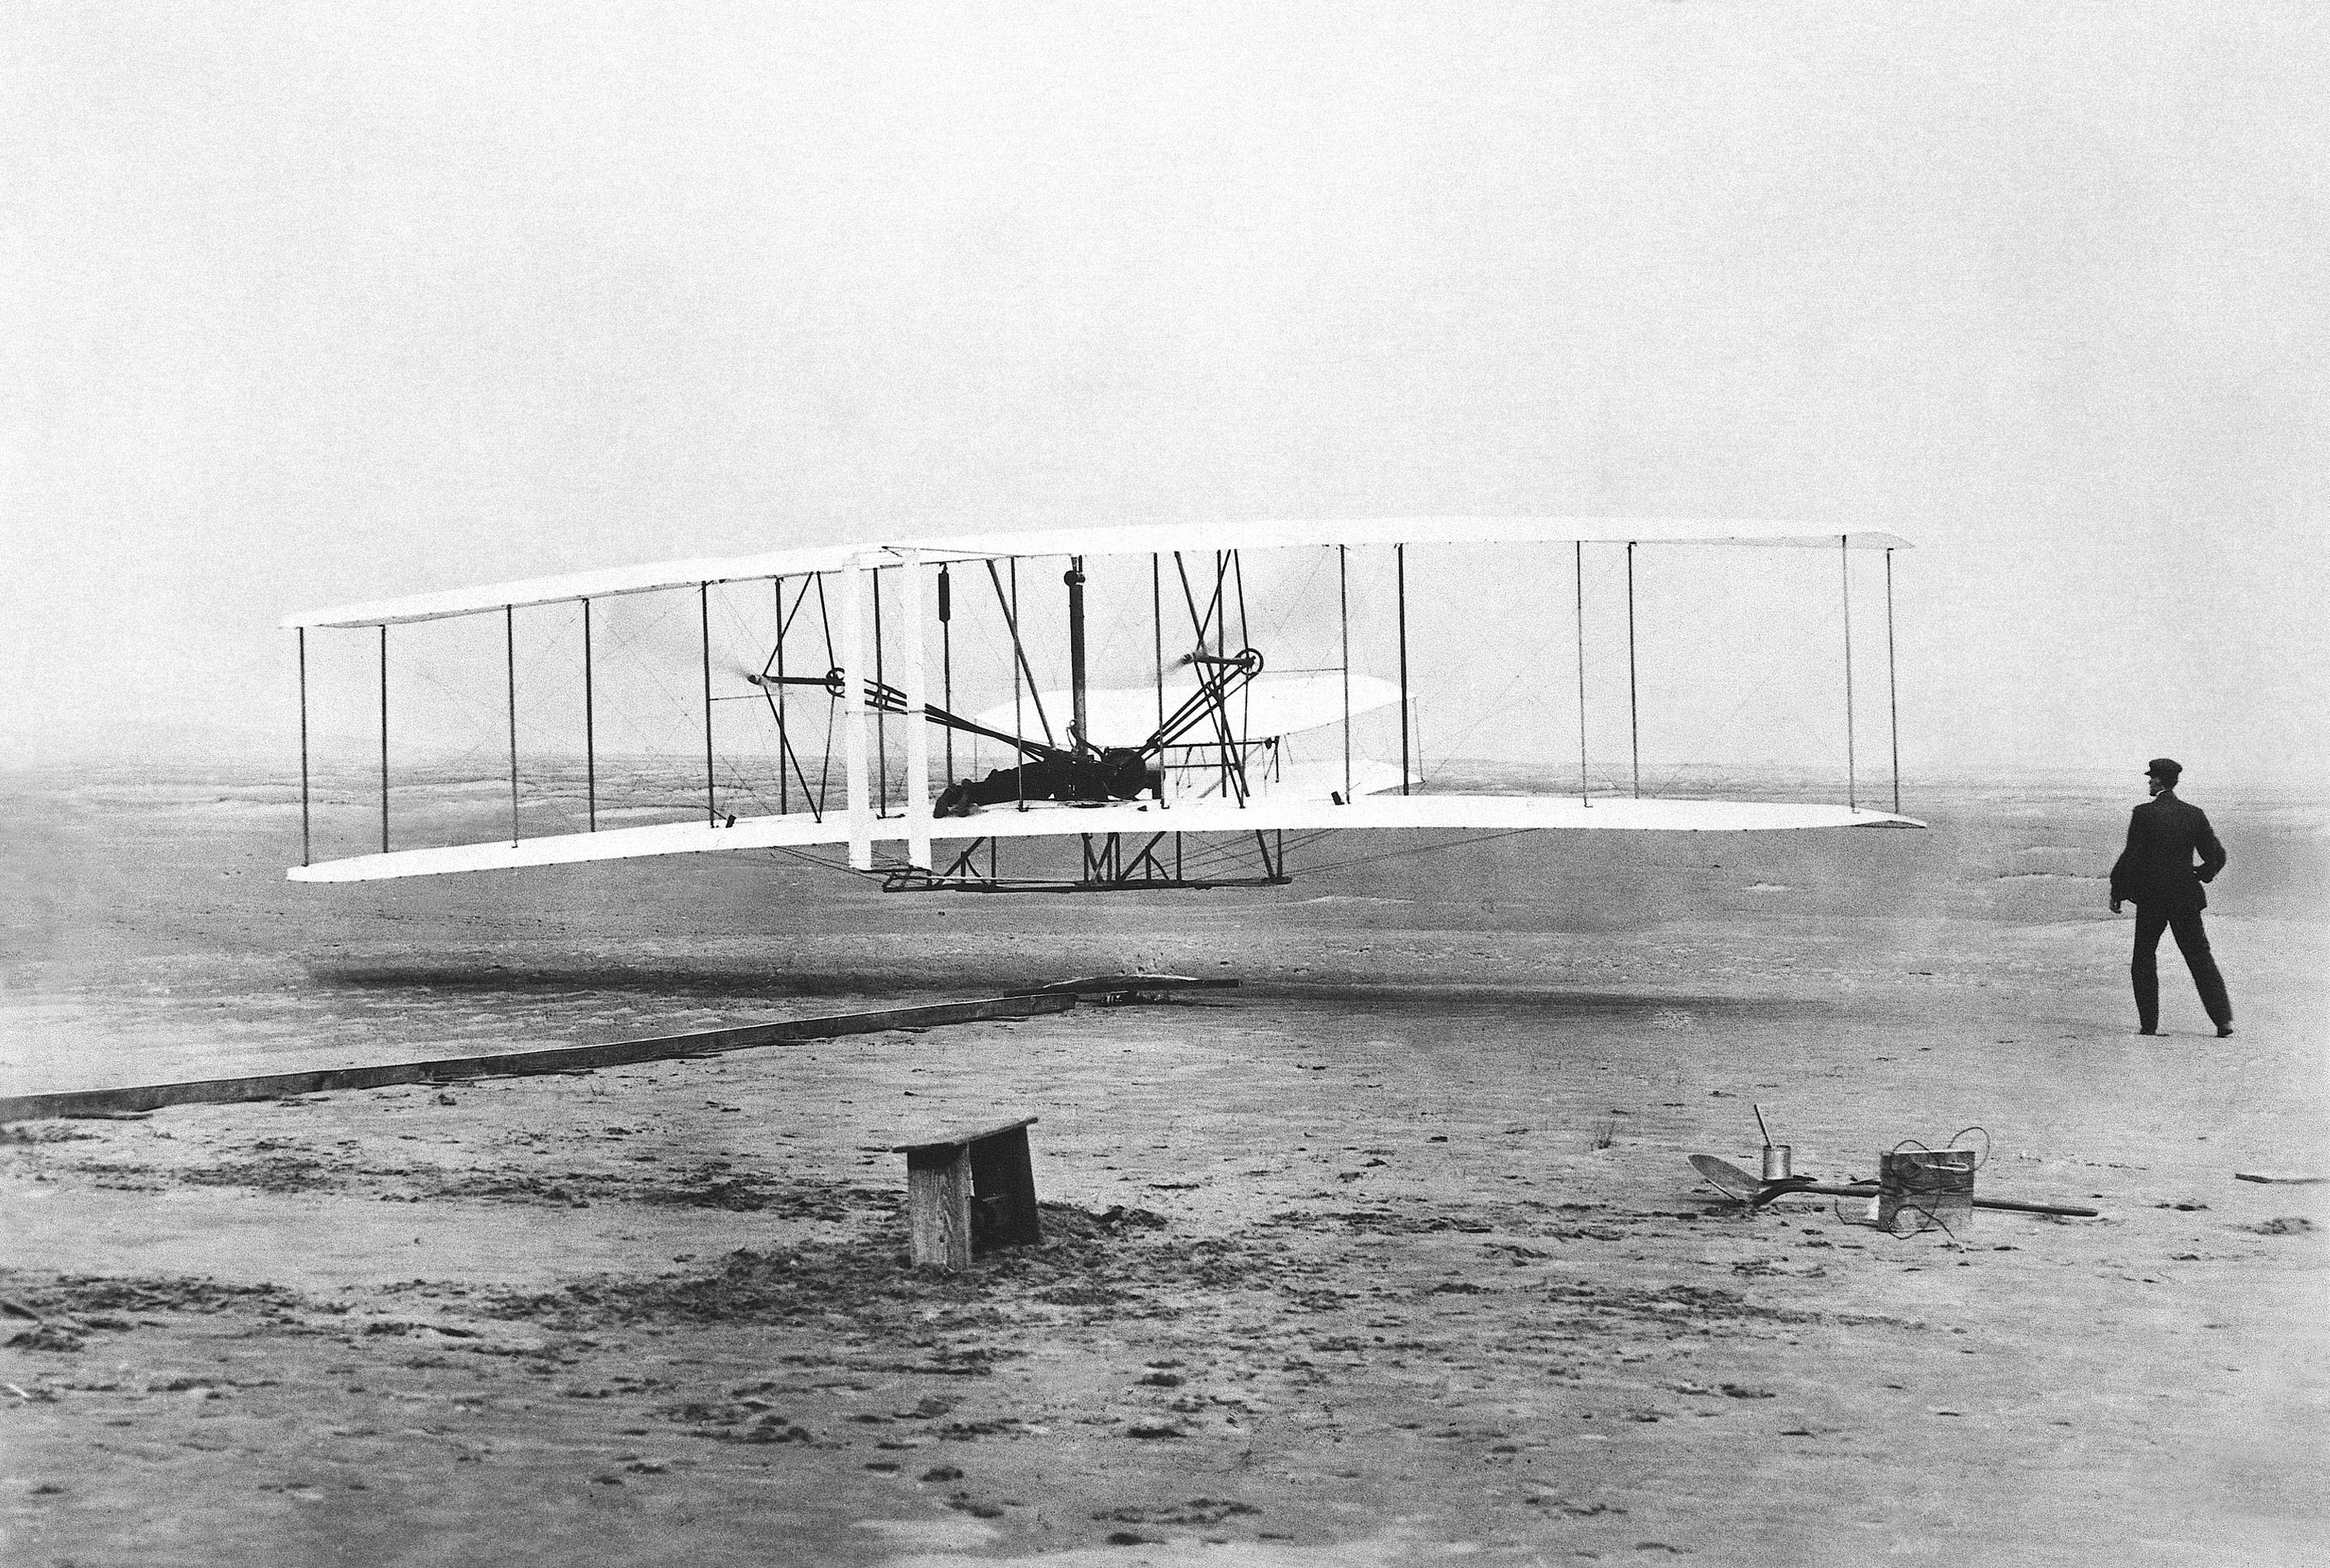 Orville Wright is at the controls of the "Wright Flyer" as his brother Wilbur Wright looks on during the plane's first flight at Kitty Hawk, N.C. Dec. 17, 1903.